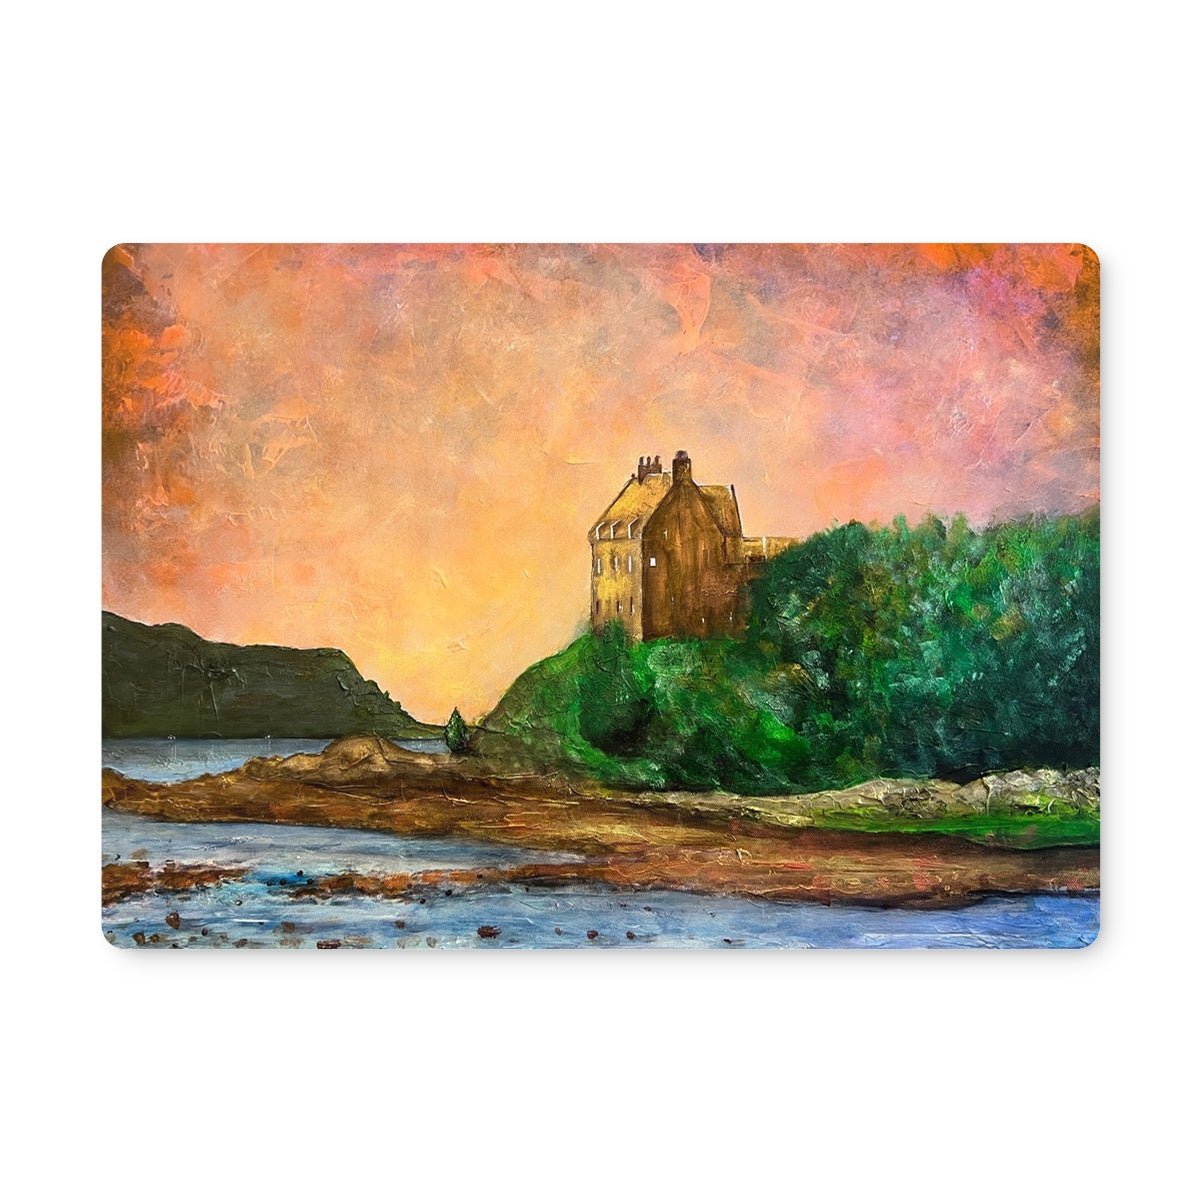 Duntrune Castle Art Gifts Placemat-Placemats-Scottish Castles Art Gallery-4 Placemats-Paintings, Prints, Homeware, Art Gifts From Scotland By Scottish Artist Kevin Hunter